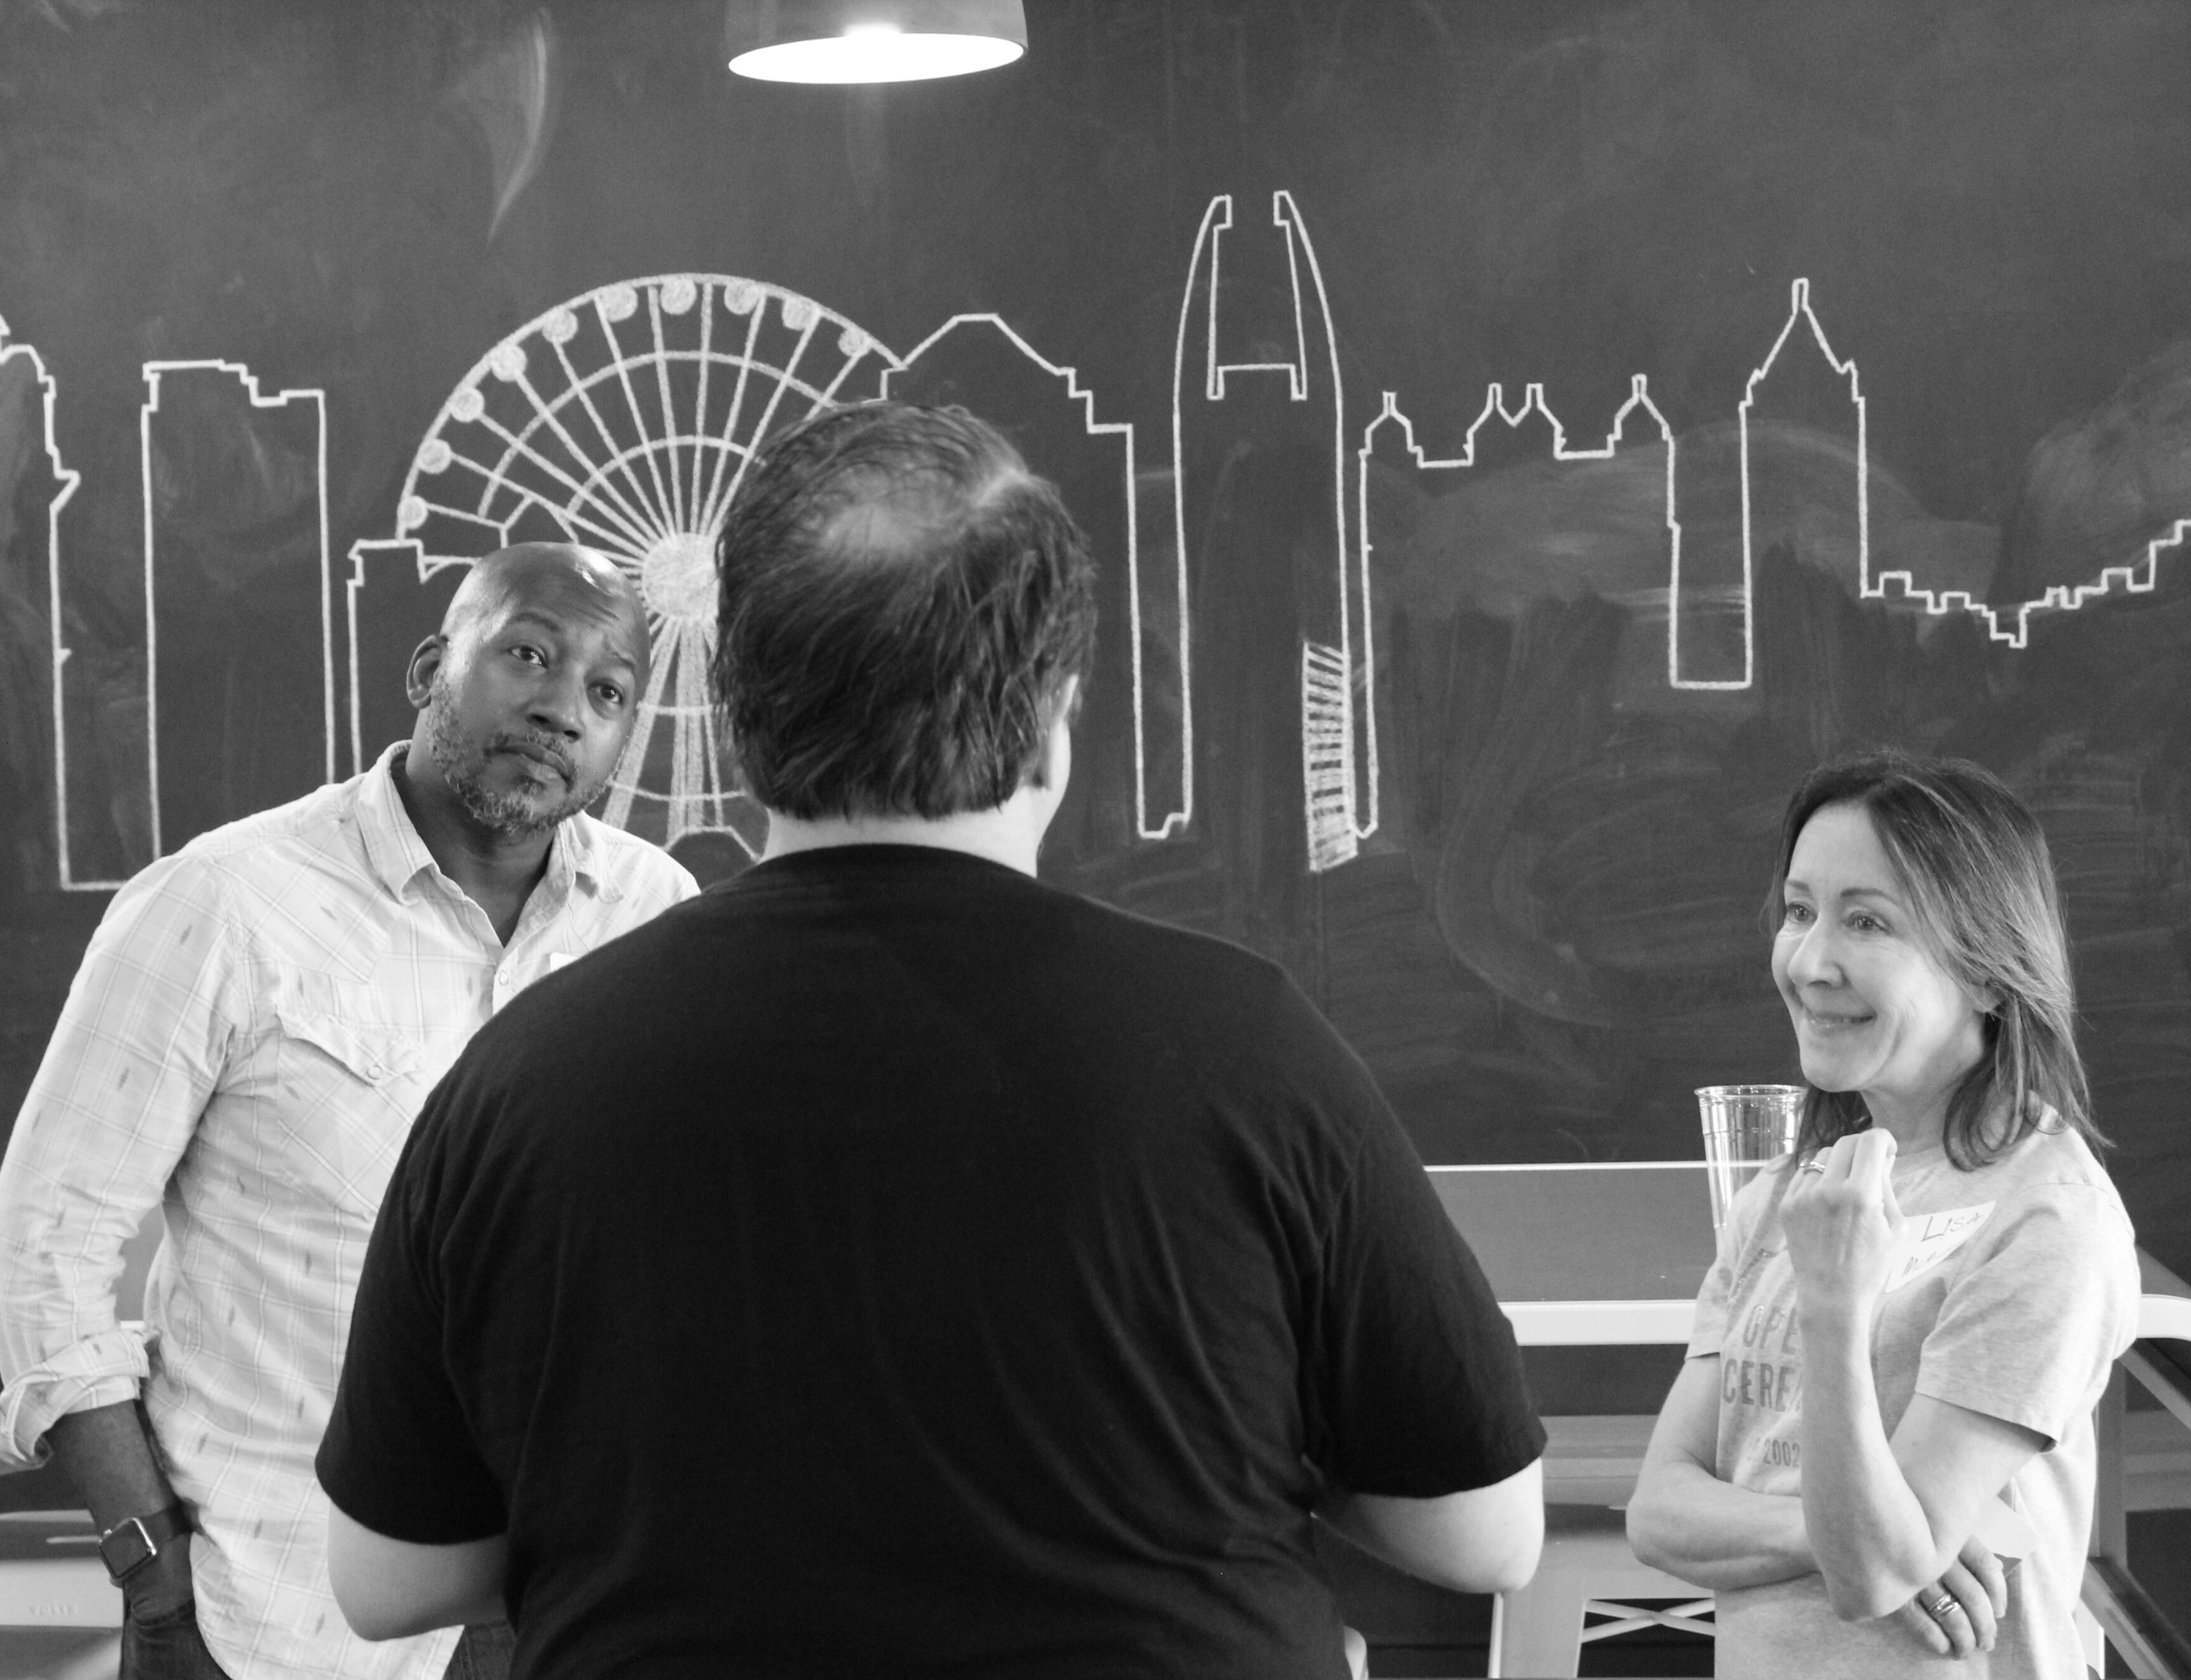 Diverse group smiling and networking with a drawing of buildings on a chalkboard in the background